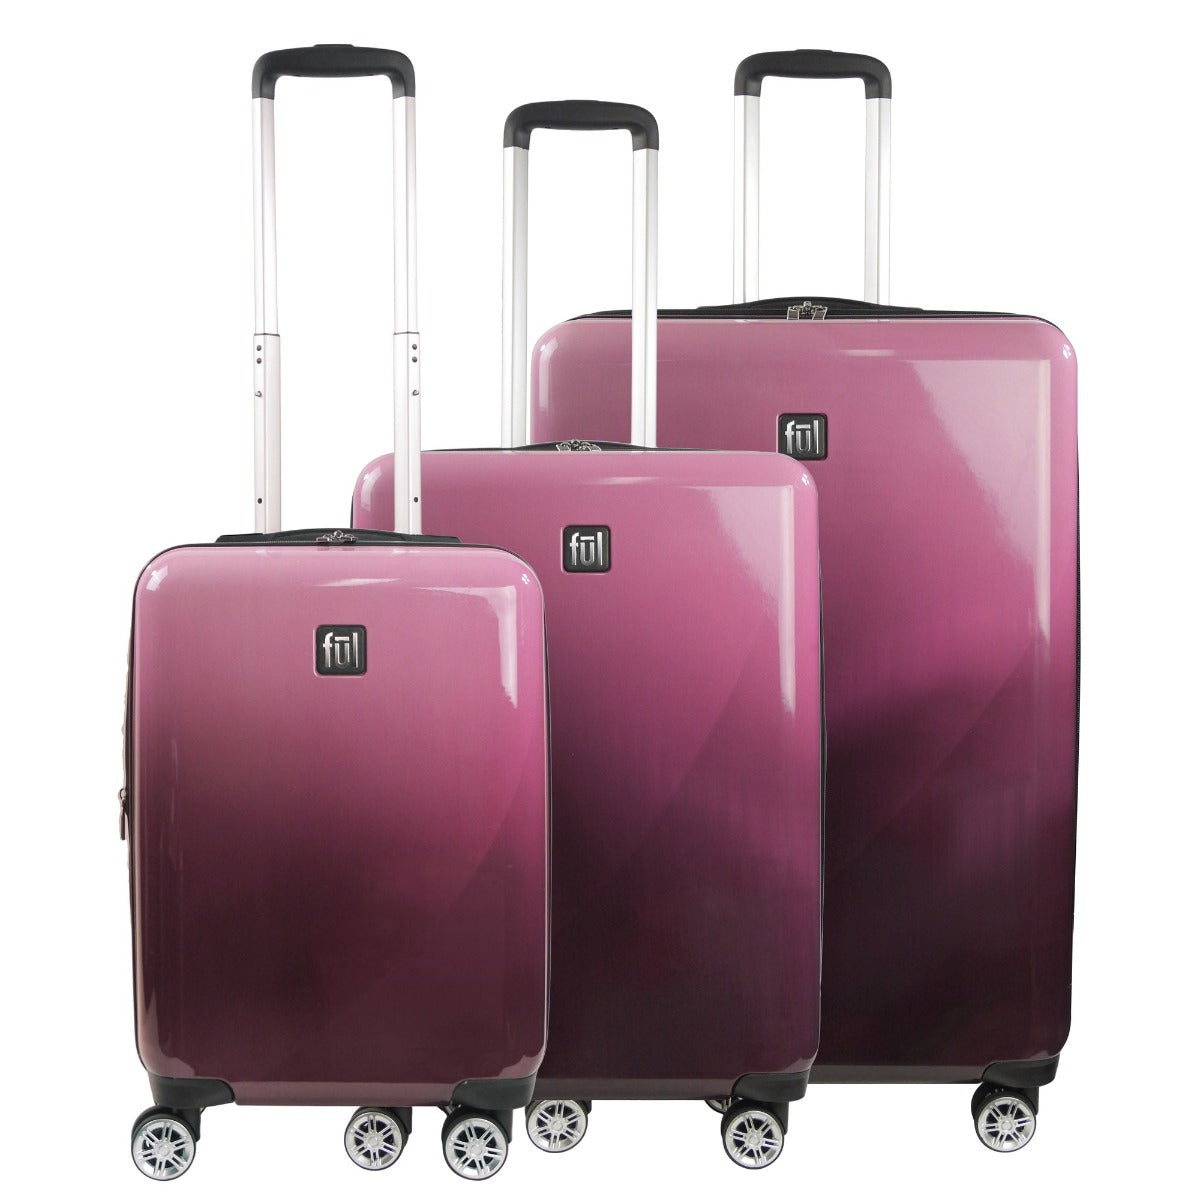 Ful Impulse Ombre Hard-sided Spinner Suitcases Luggage, 3pc set, Pink